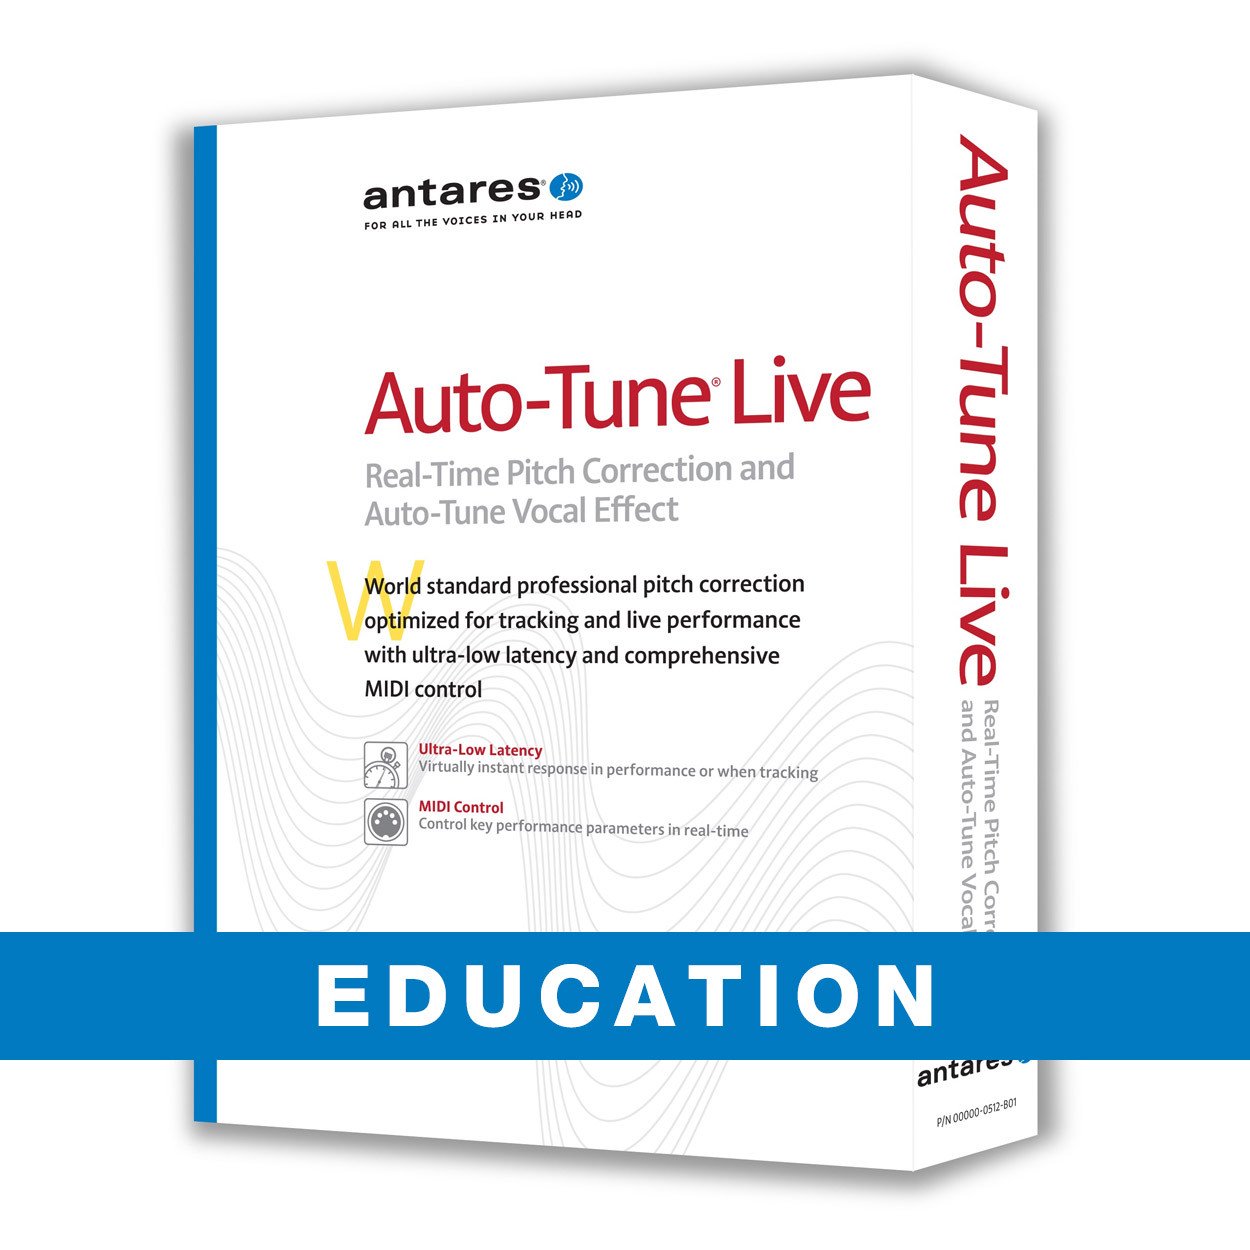 Antares Auto-tune Live Pitch Correction Plug-in Free